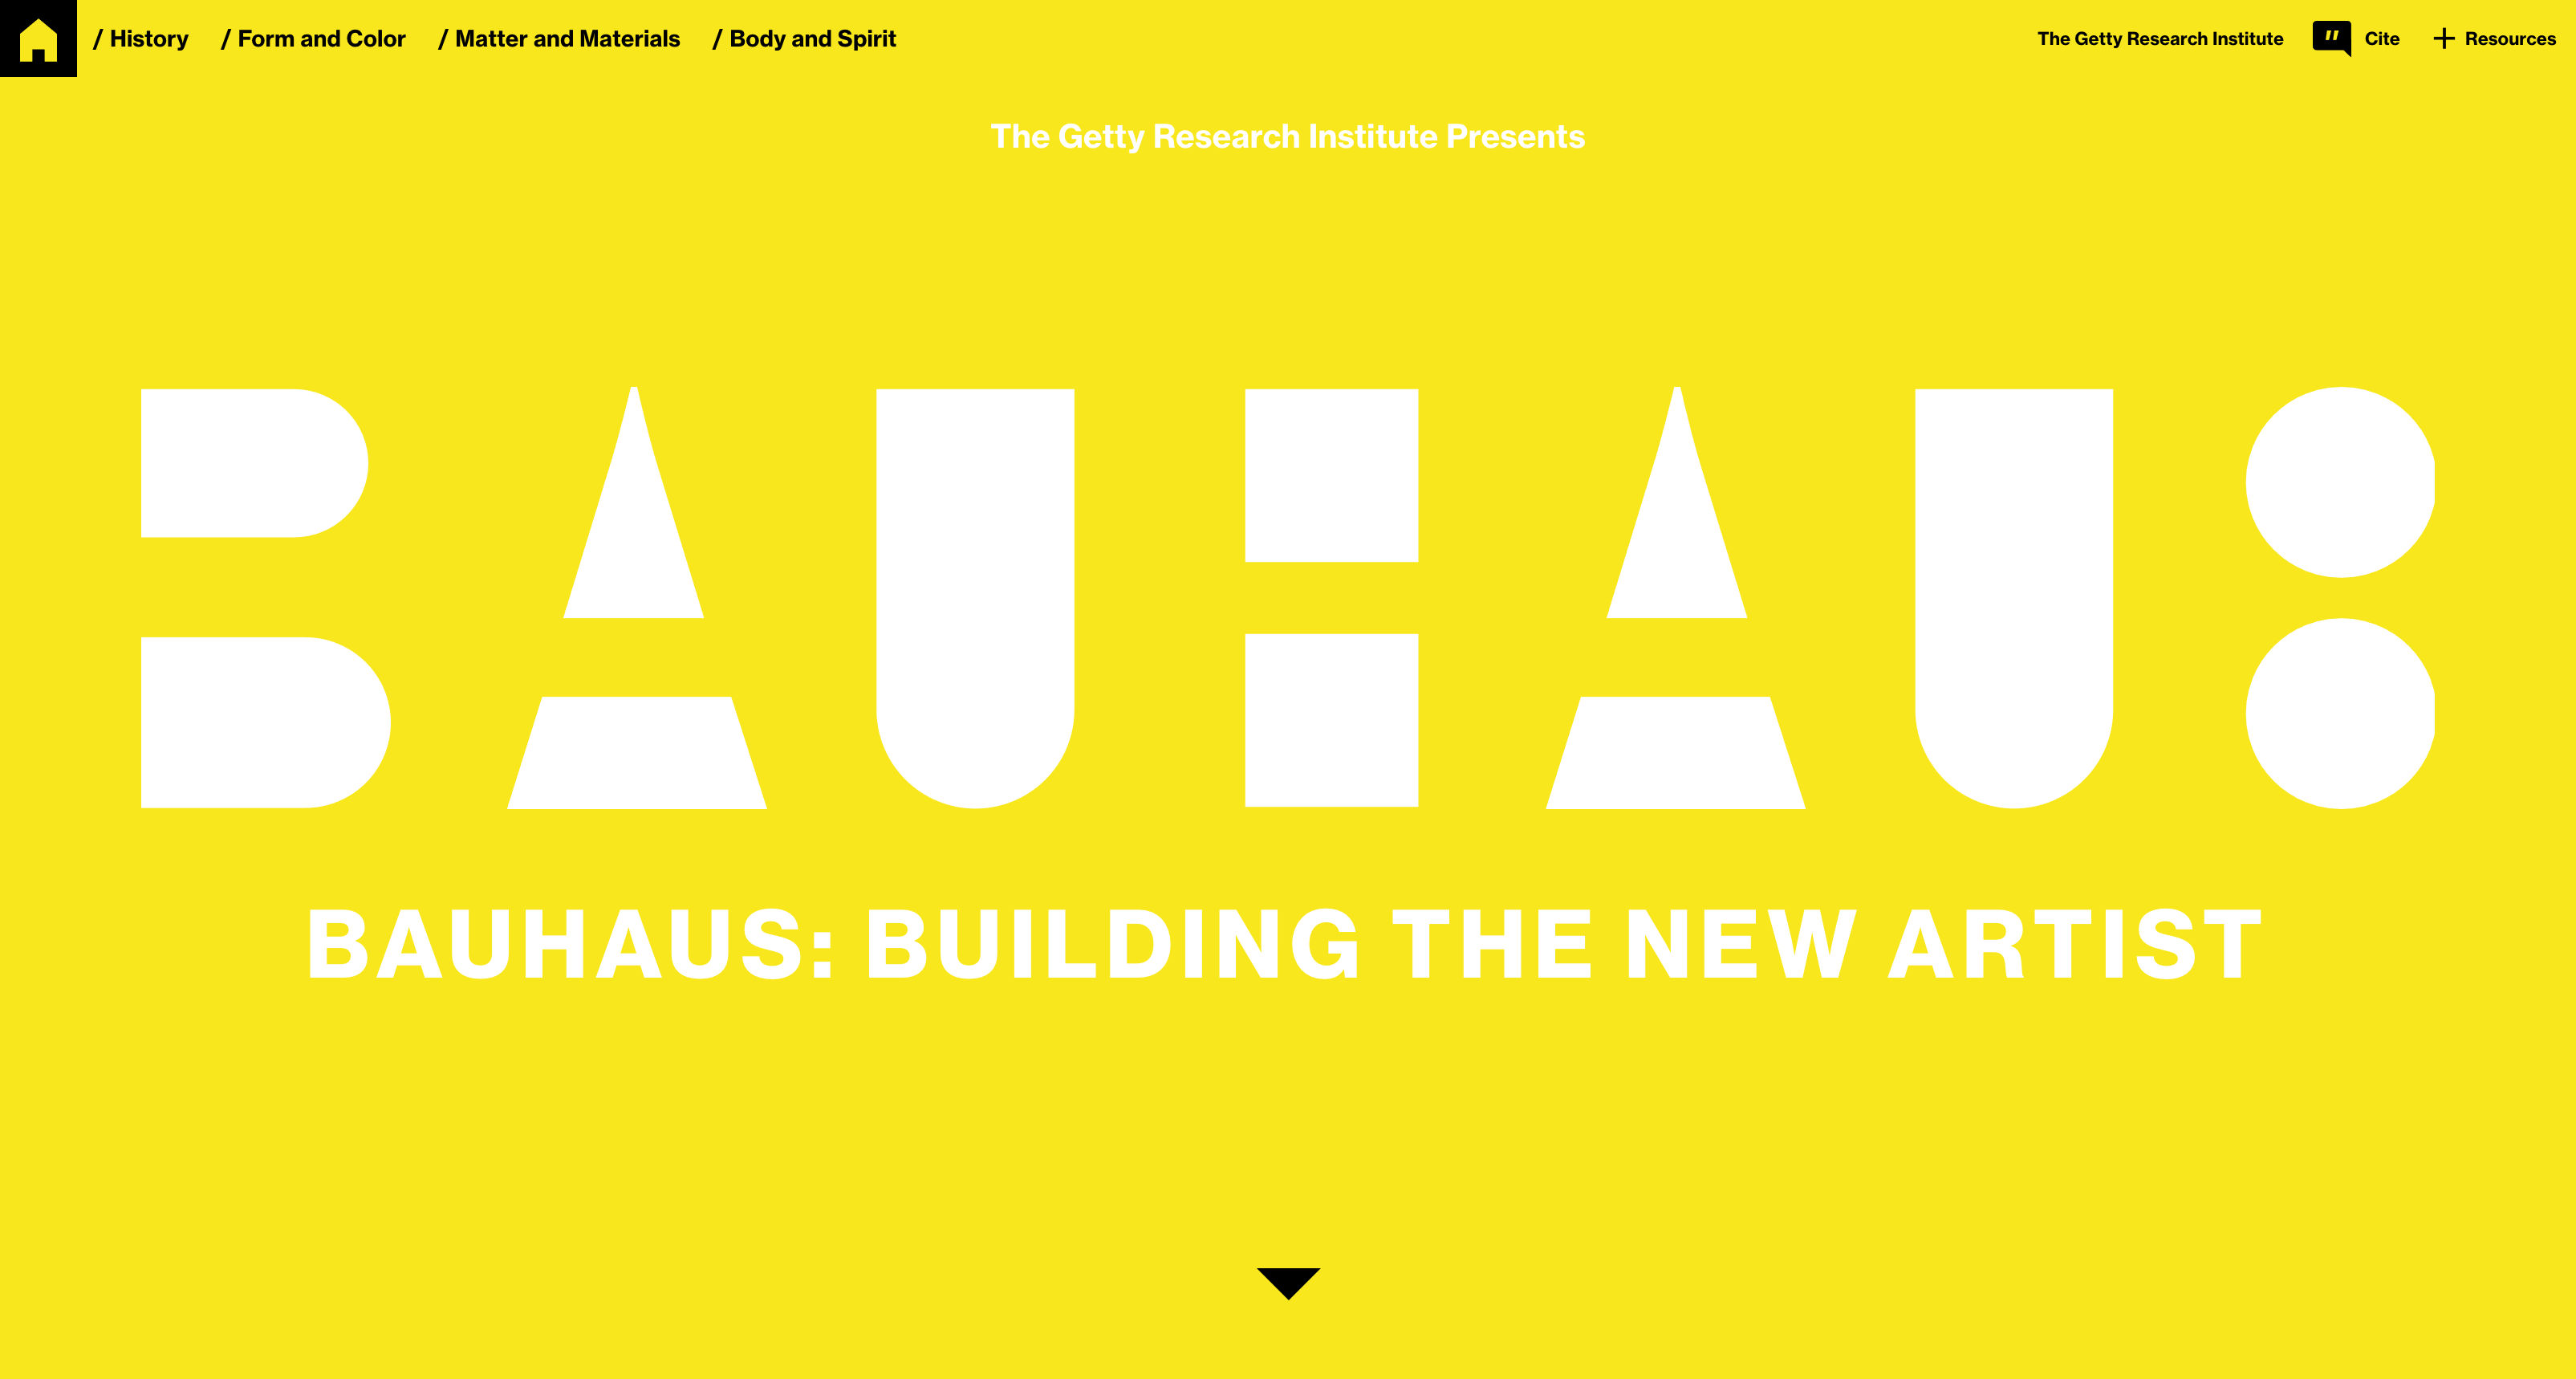 Bauhaus 100th Anniversary site for the Getty Research Institute 